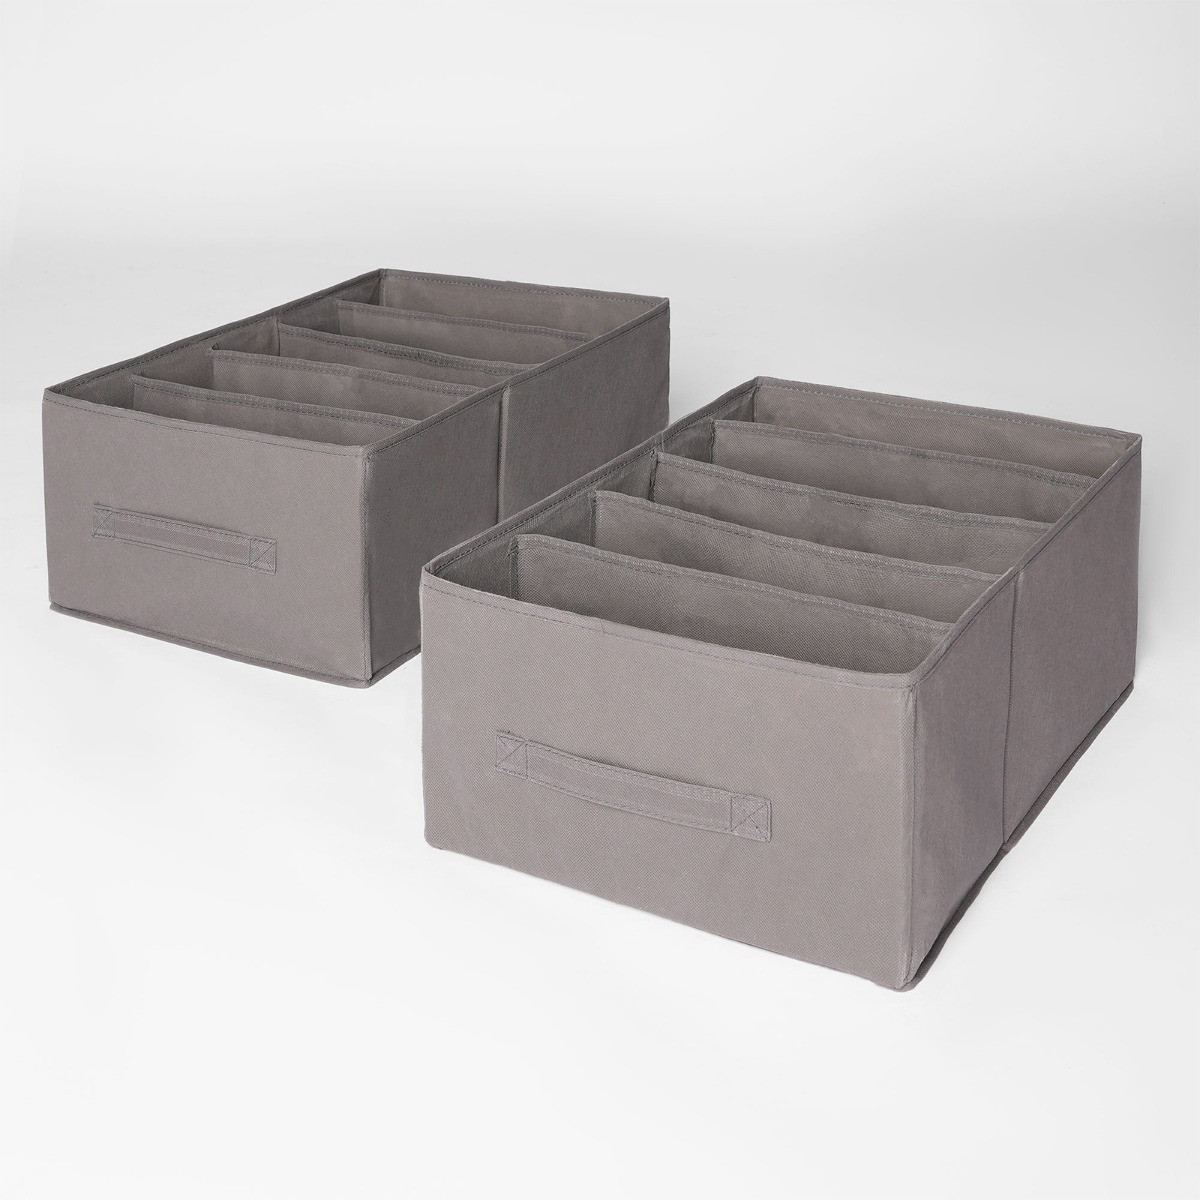 OHS 5 Grid Clothes Divider Storage Box, Charcoal - 2 pack>